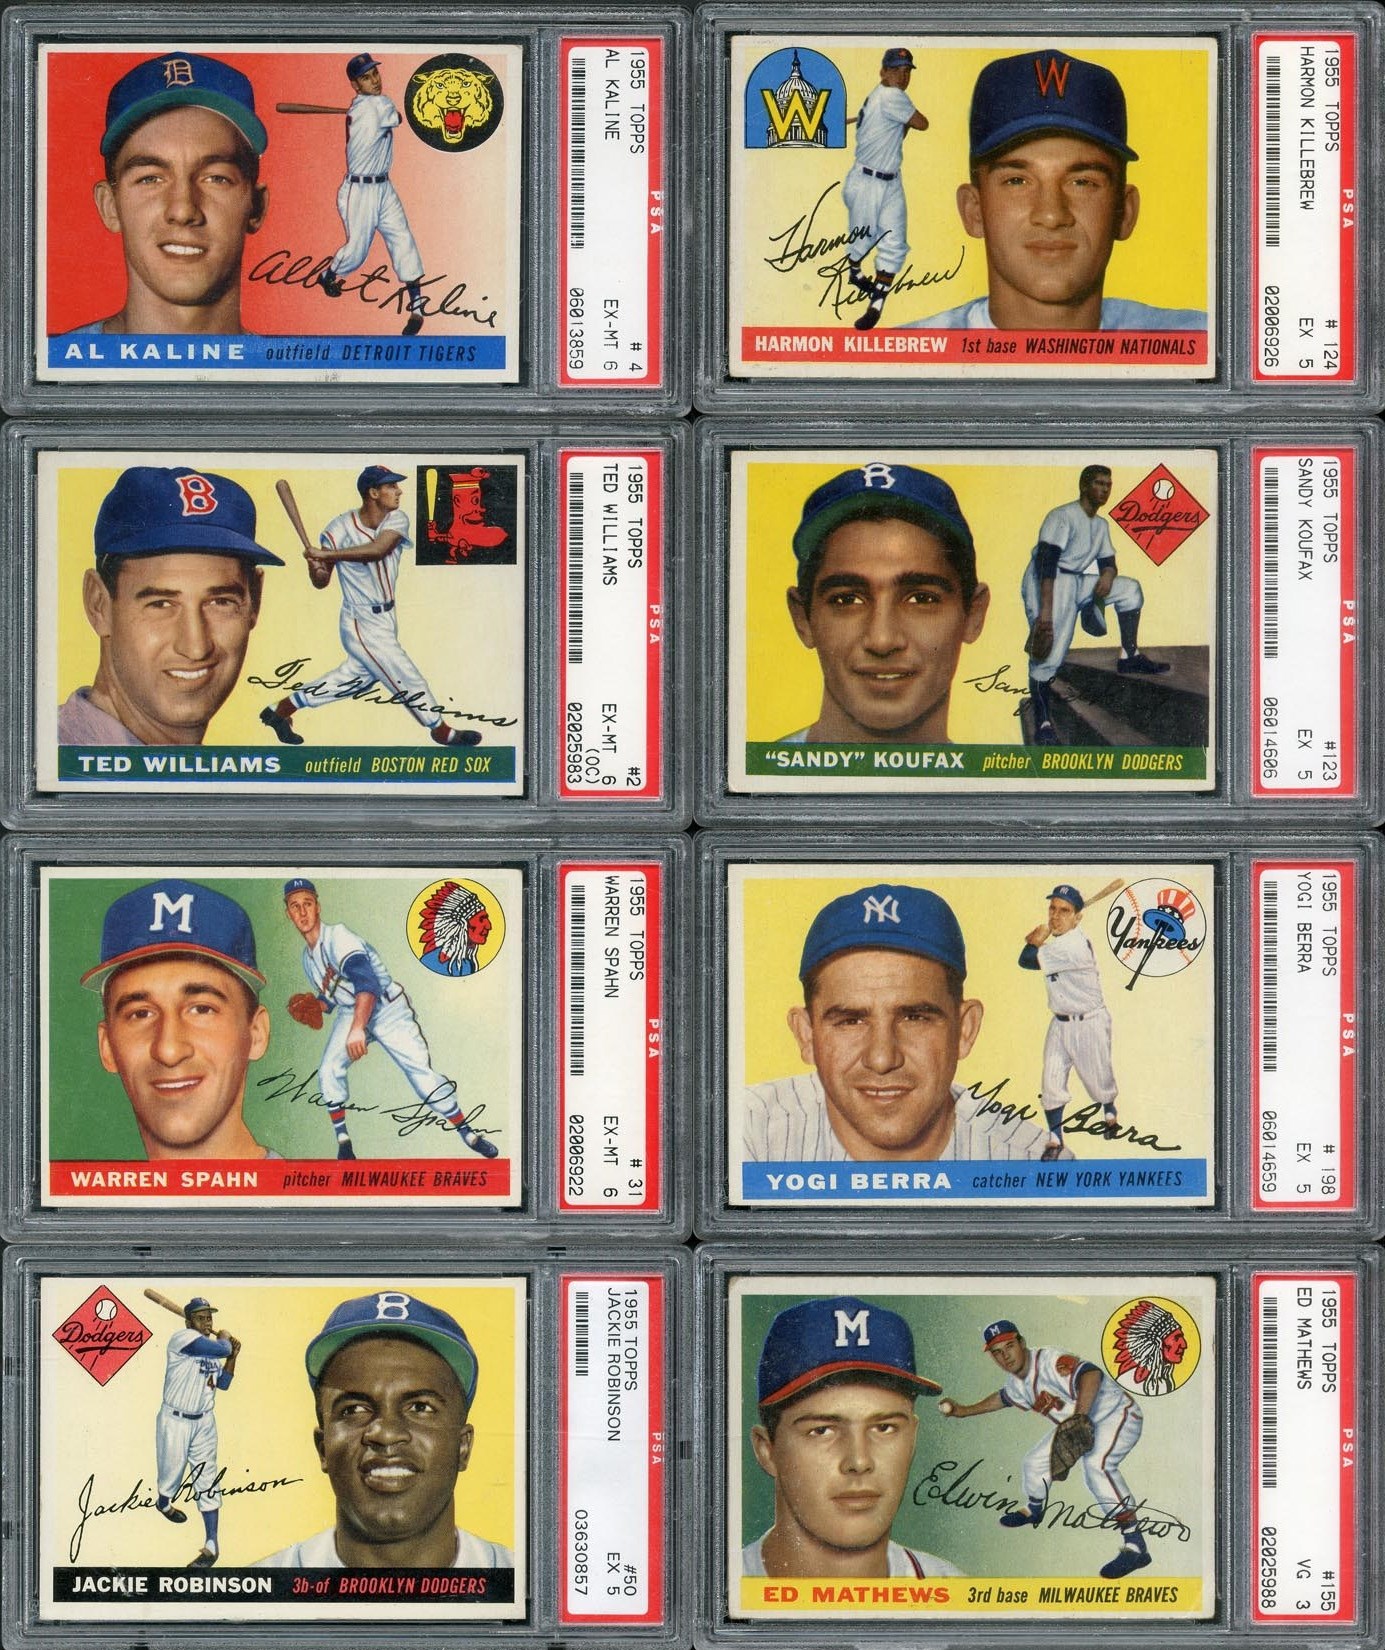 Baseball and Trading Cards - 1955 Topps PSA Graded Collection w/Koufax, Williams, Robinson (47 Cards)